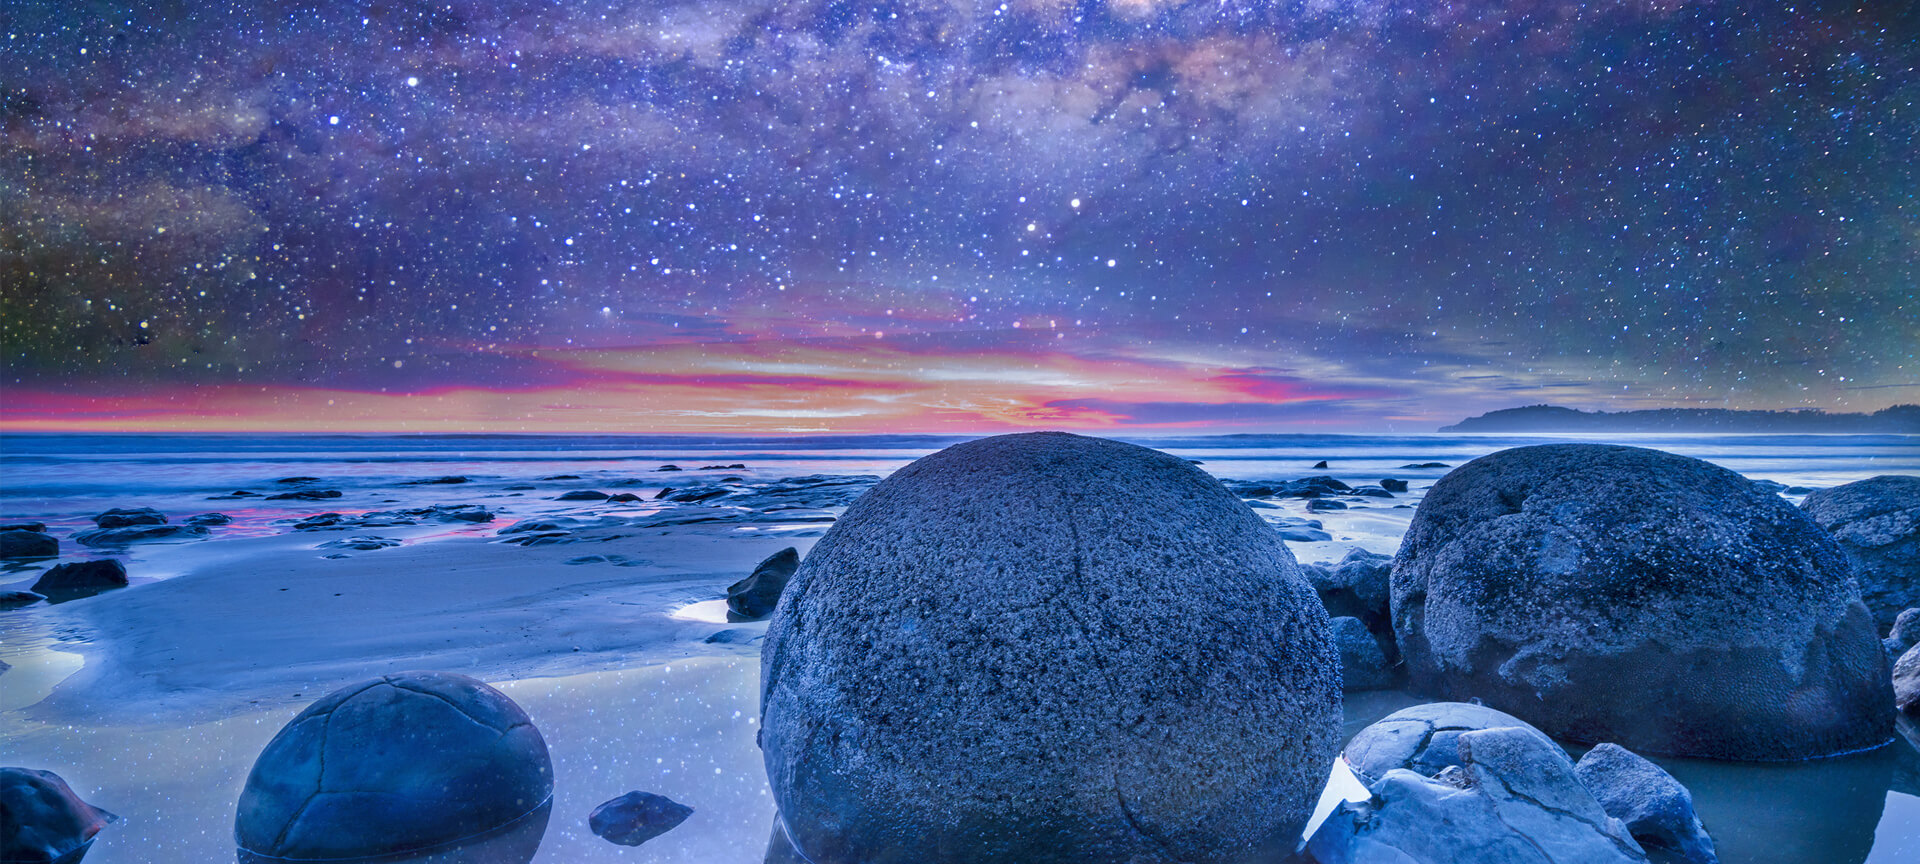 Moeraki boulders looking out to sea with starry night sky and sunset